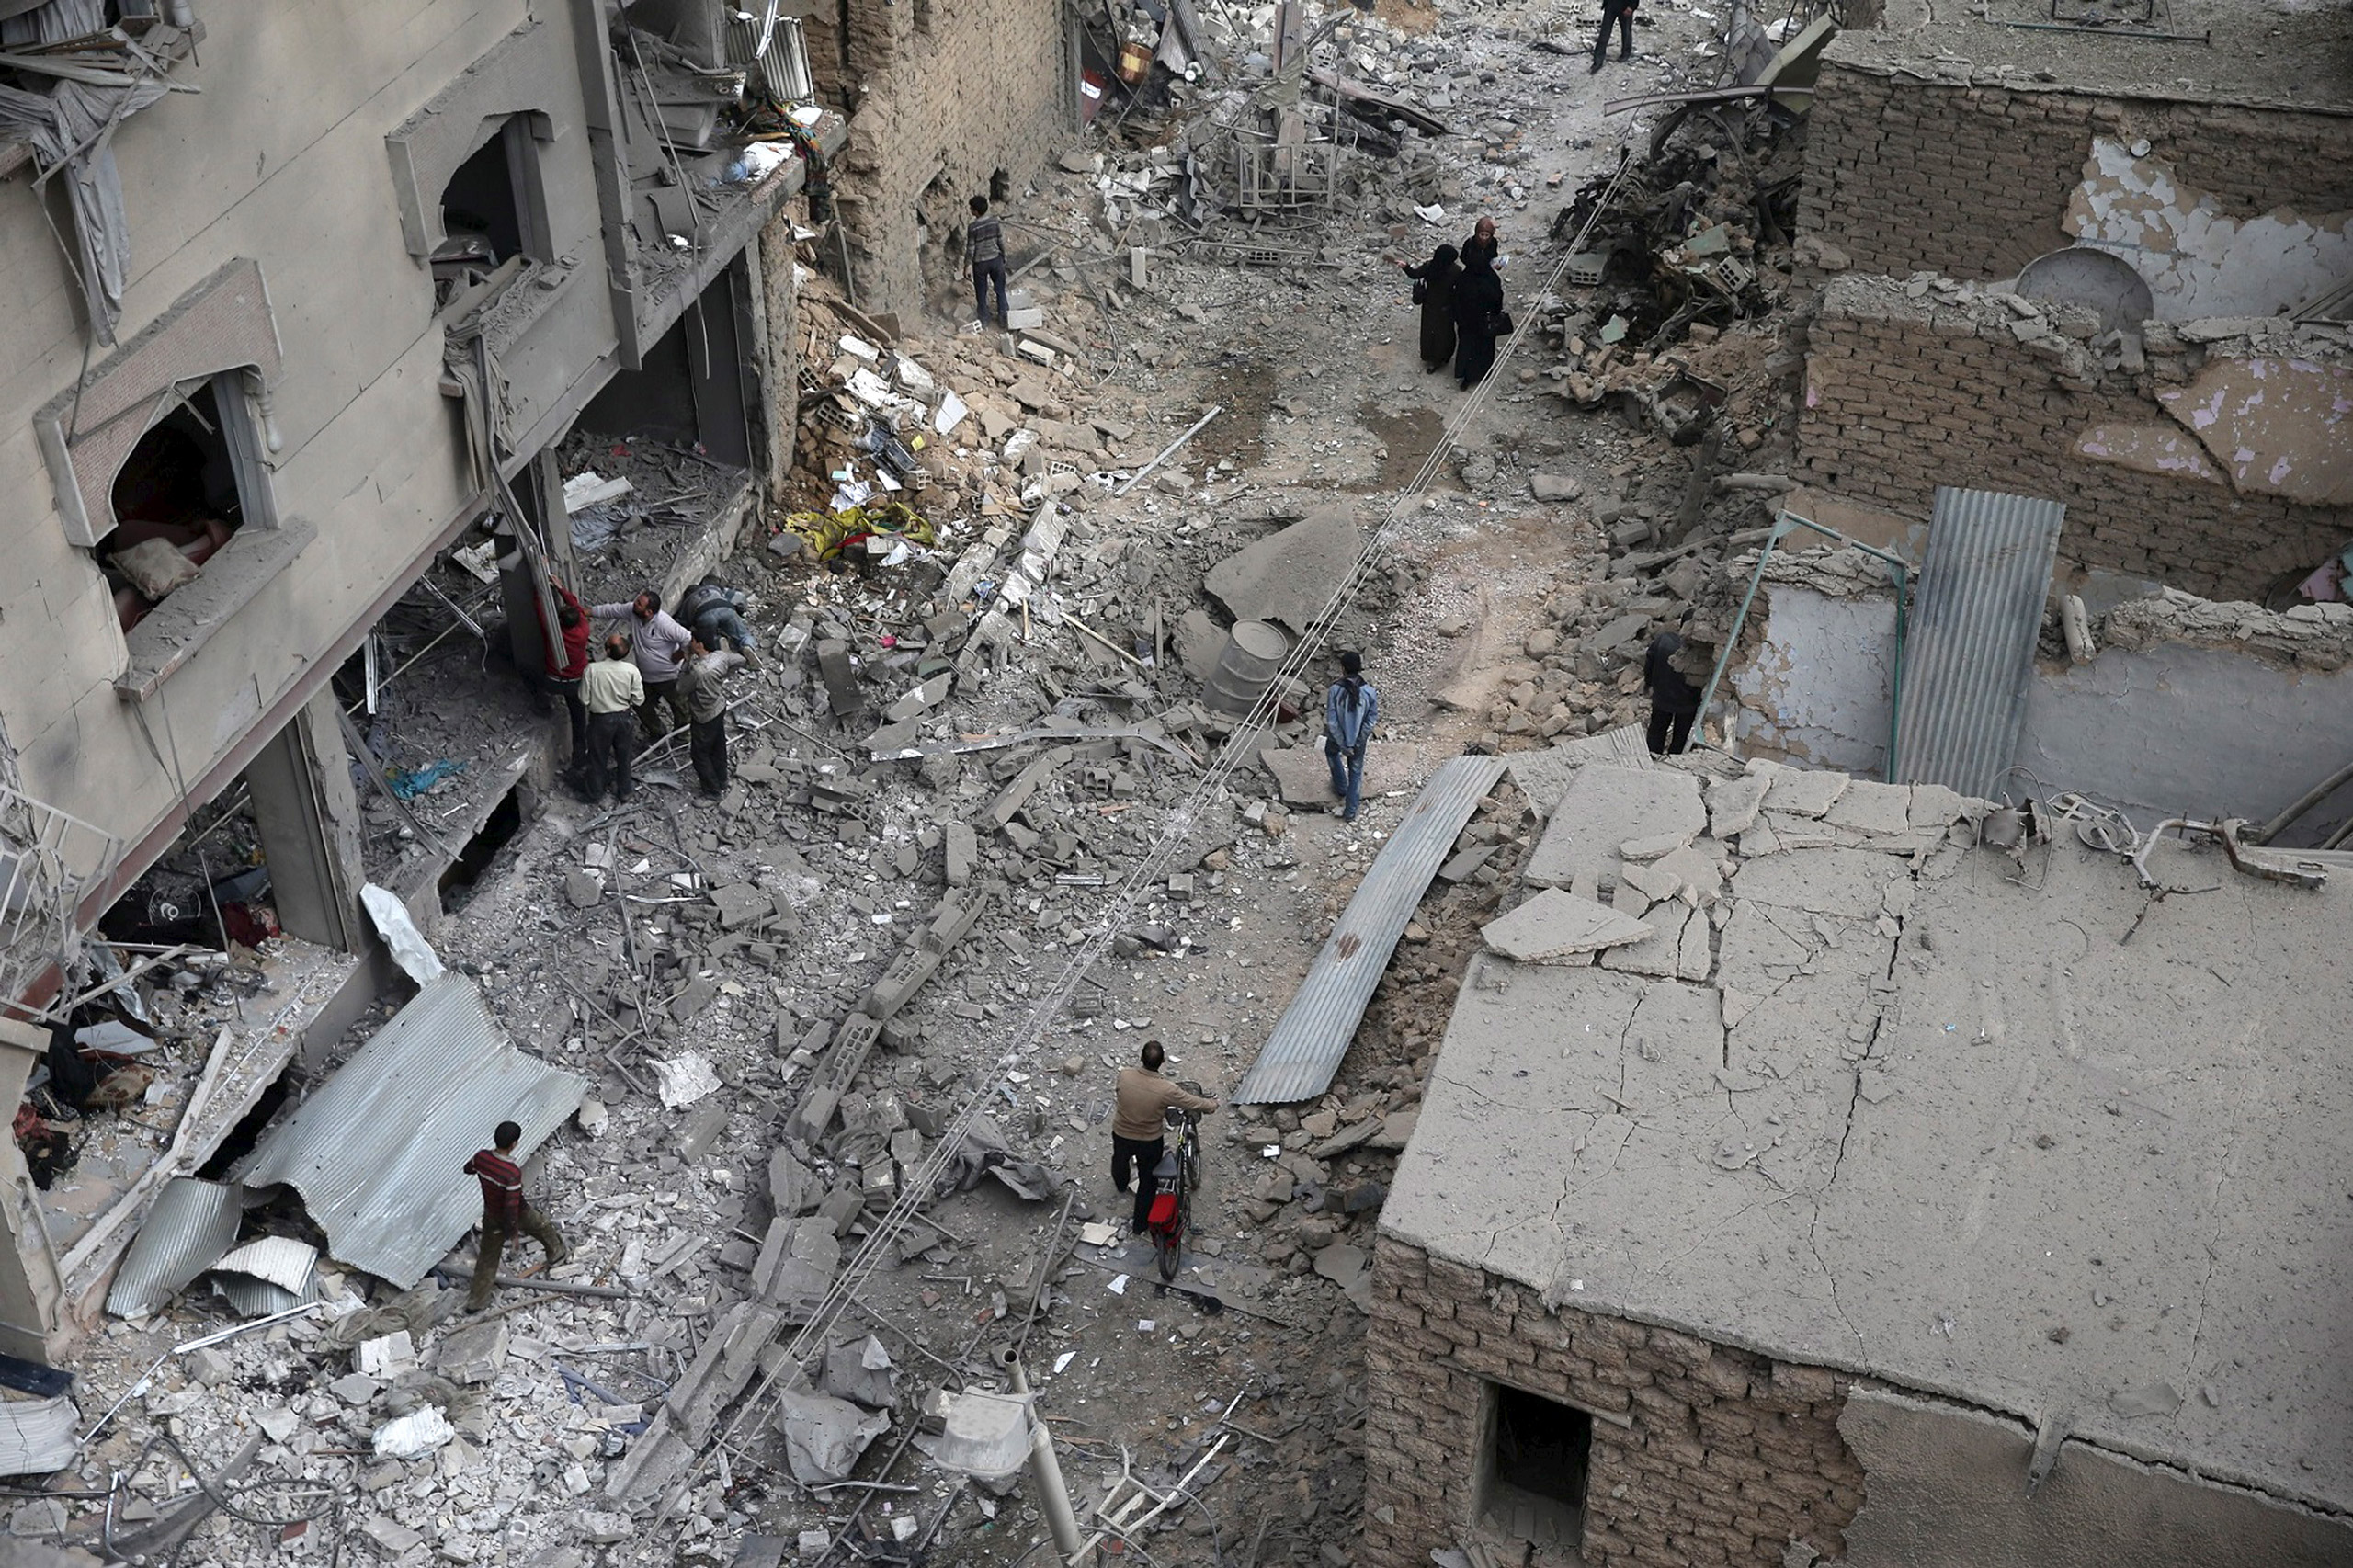 Residents inspect damage from what activists said was an airstrike by forces loyal to Syria's President Bashar al-Assad on the main field hospital in the town of Douma, north-east of Damascus, on Oct. 29, 2015. (Bassam Khabieh—Reuters)